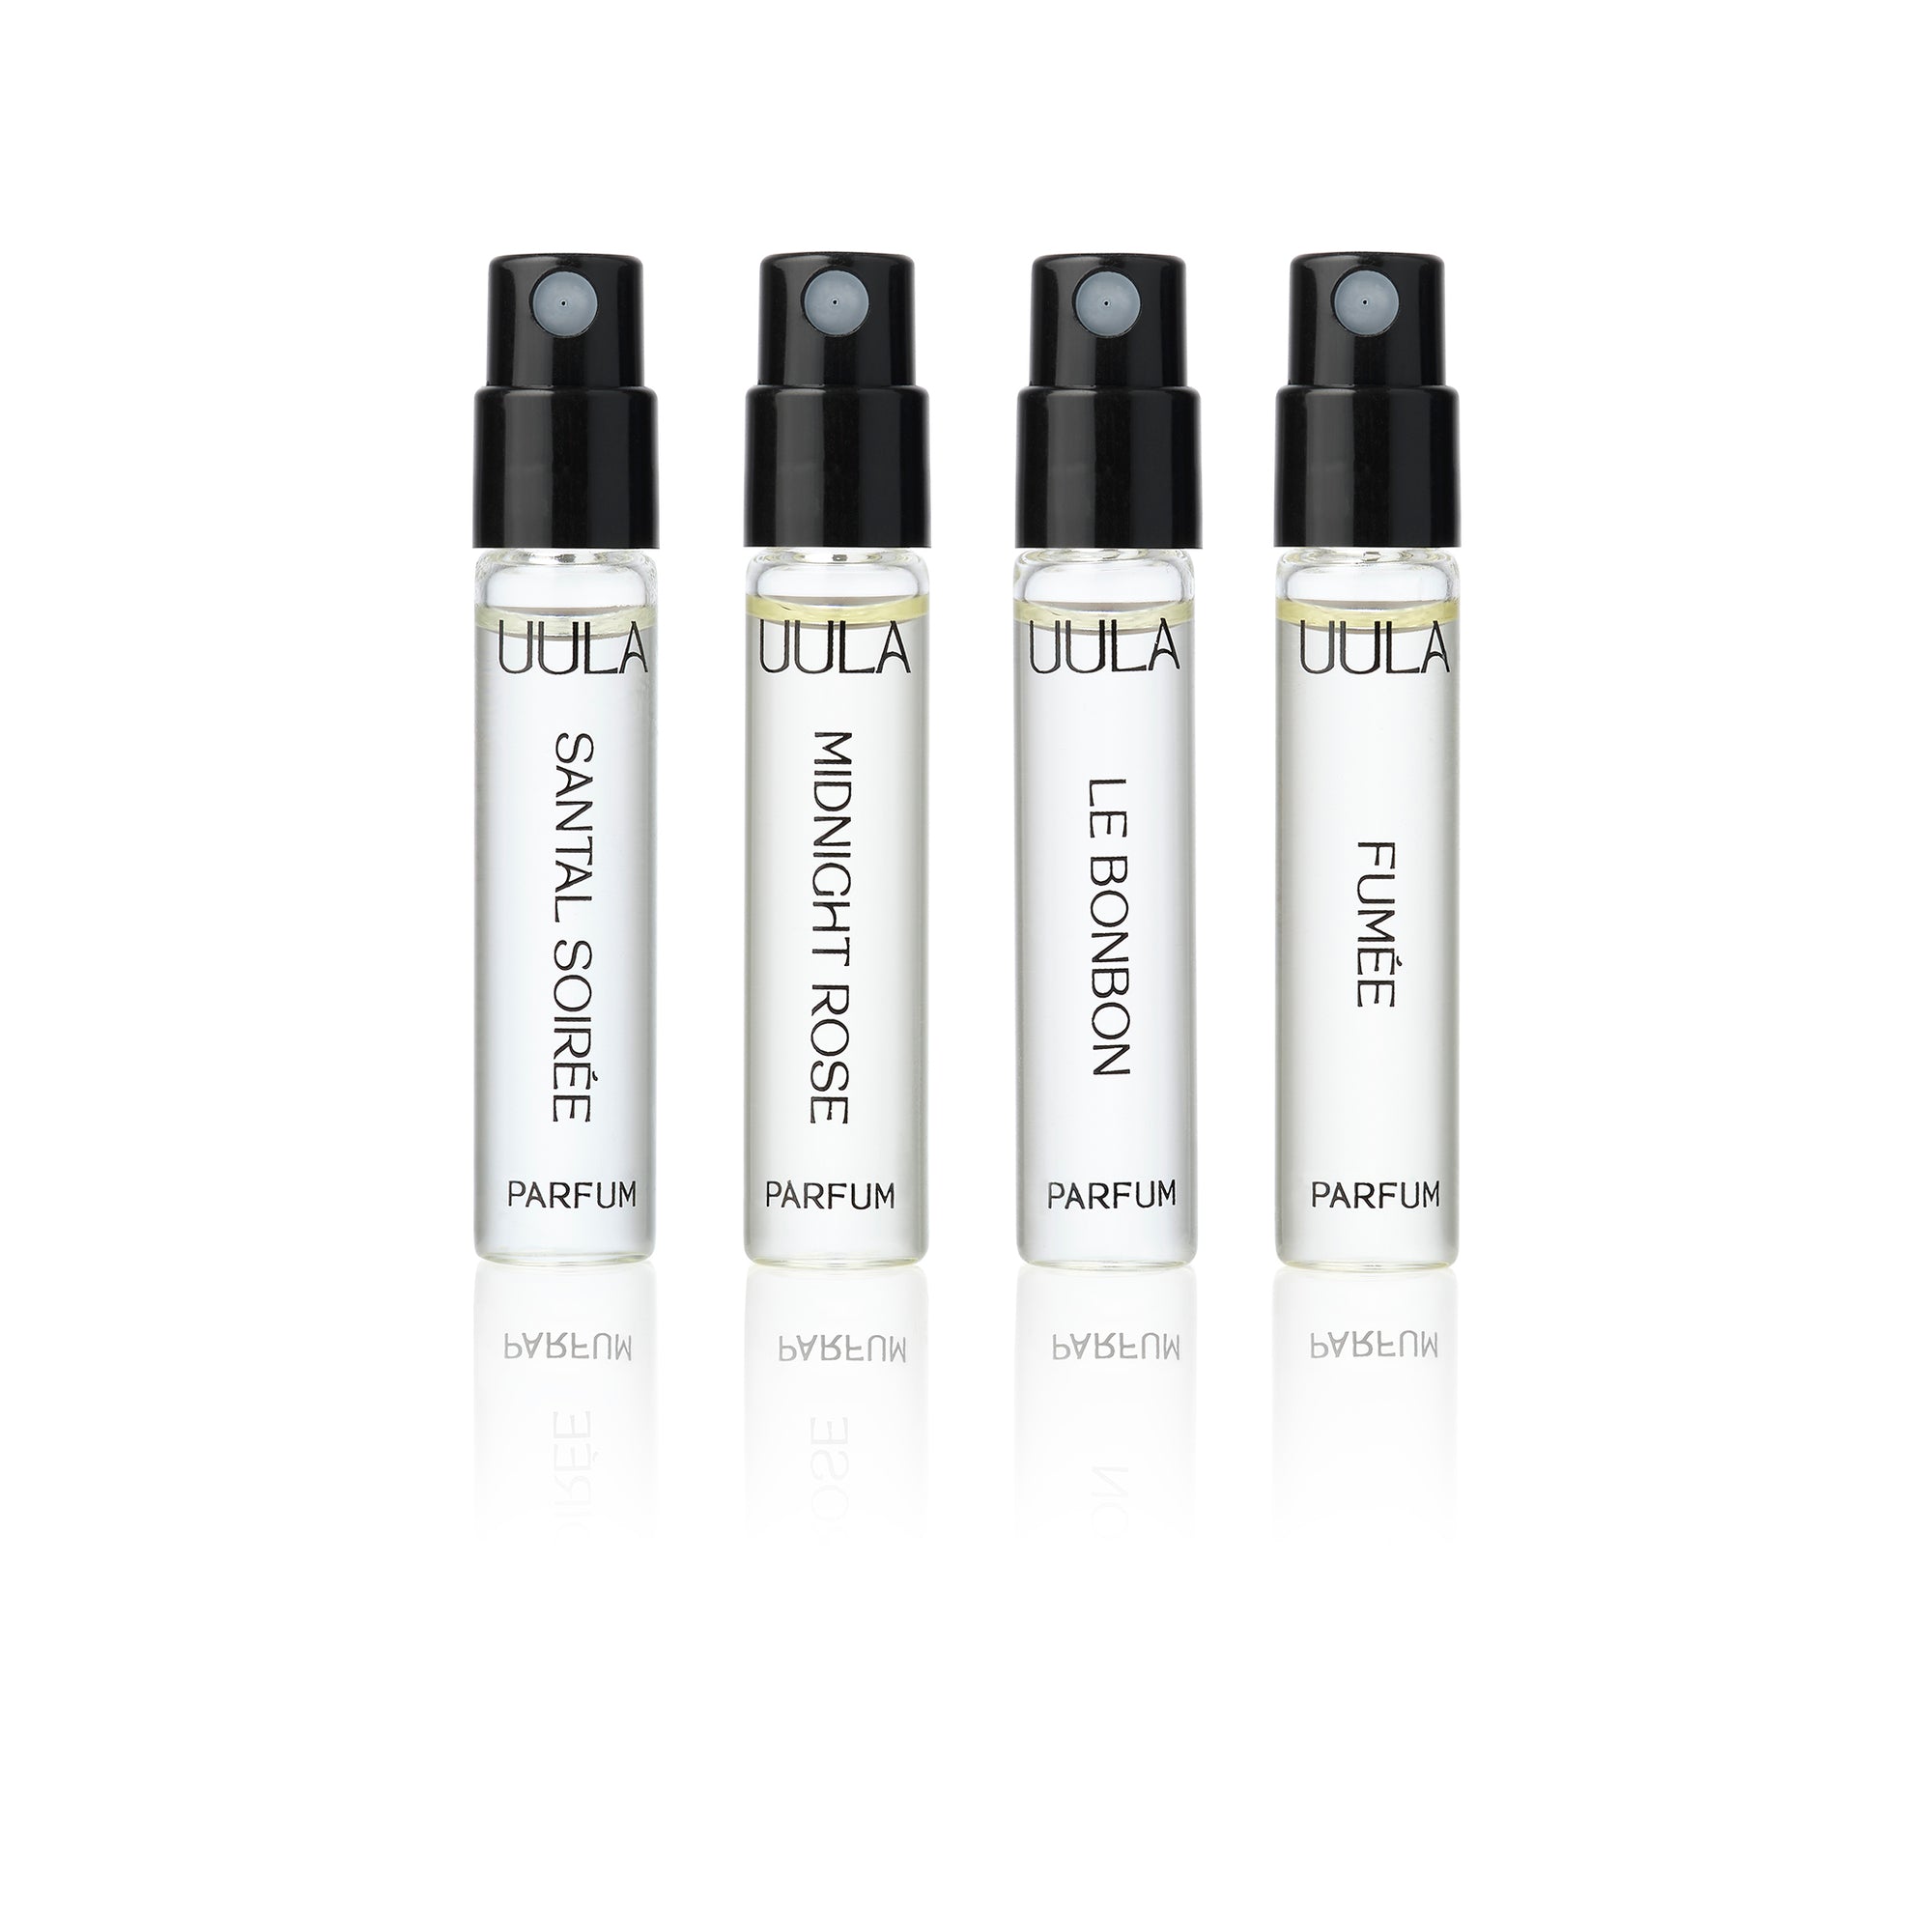 2.5ml vials of the UULA fragrance range, known as the discovery kit on a white background